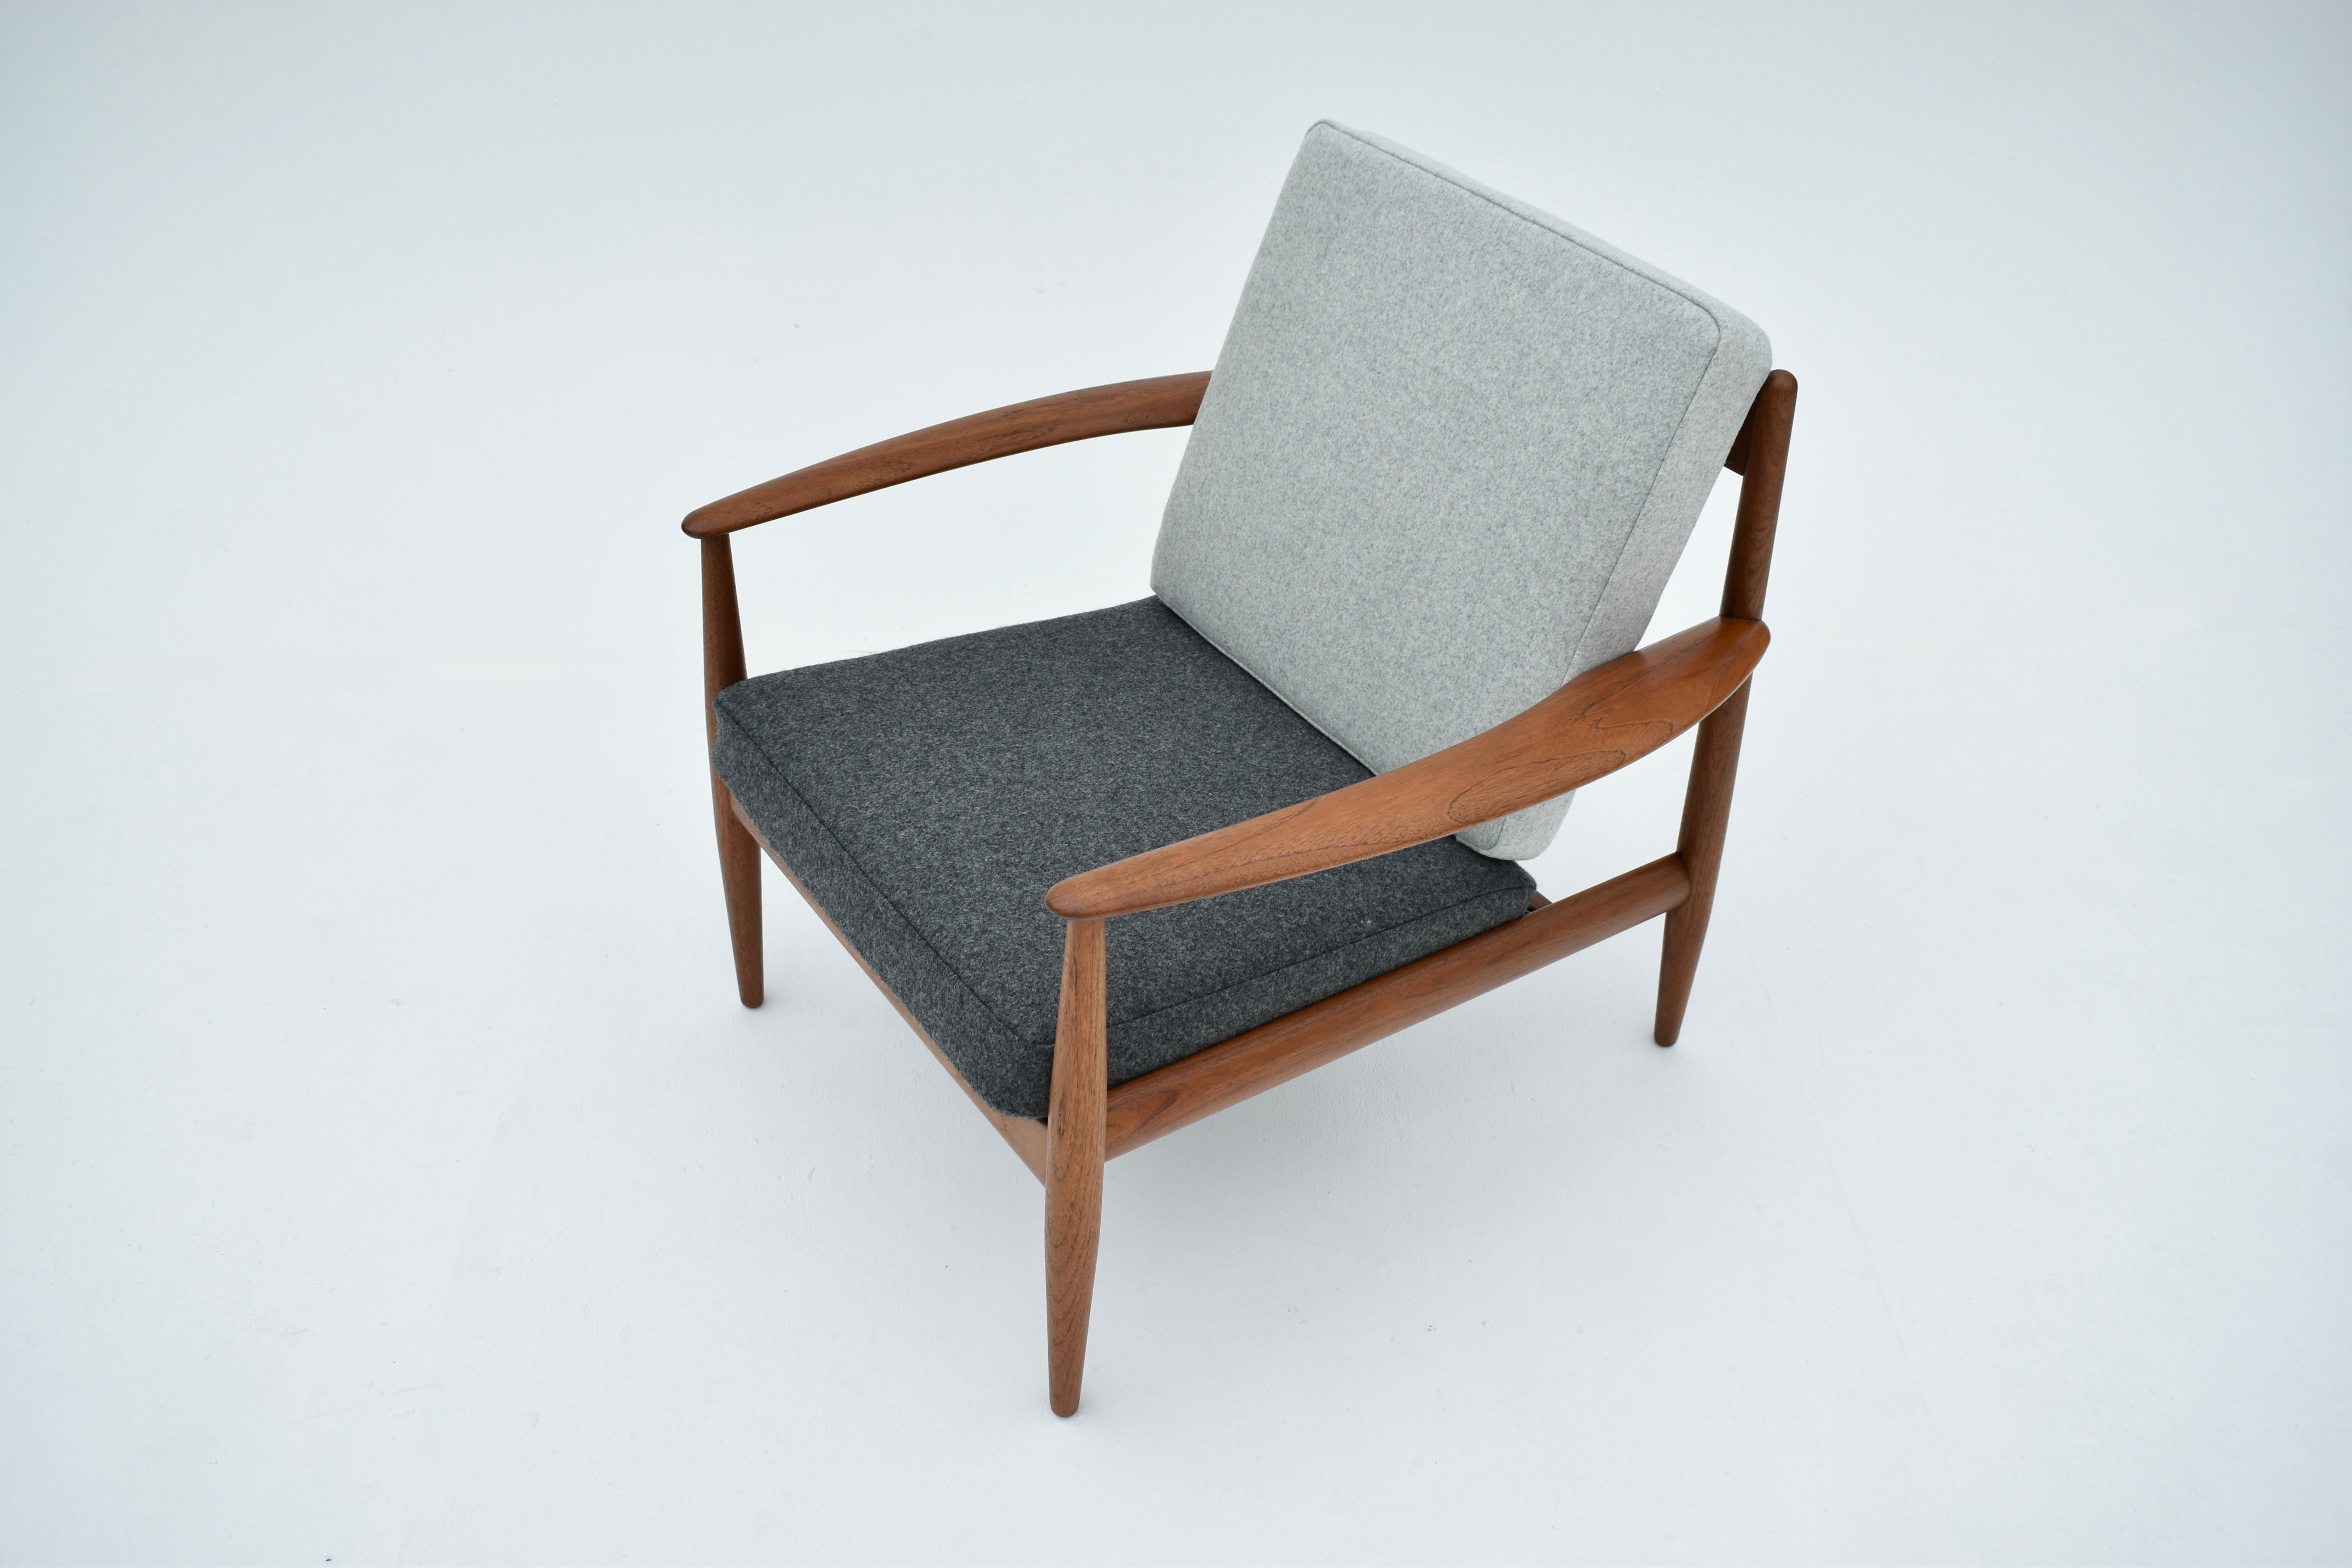 A beautiful solid teak lounge chair designed by Grete Jalk in the mid 50’s for France & Son, Denmark.

This is an early production chair and the most desirable in our opinion.

This example offered in excellent condition. The foam cushions have been